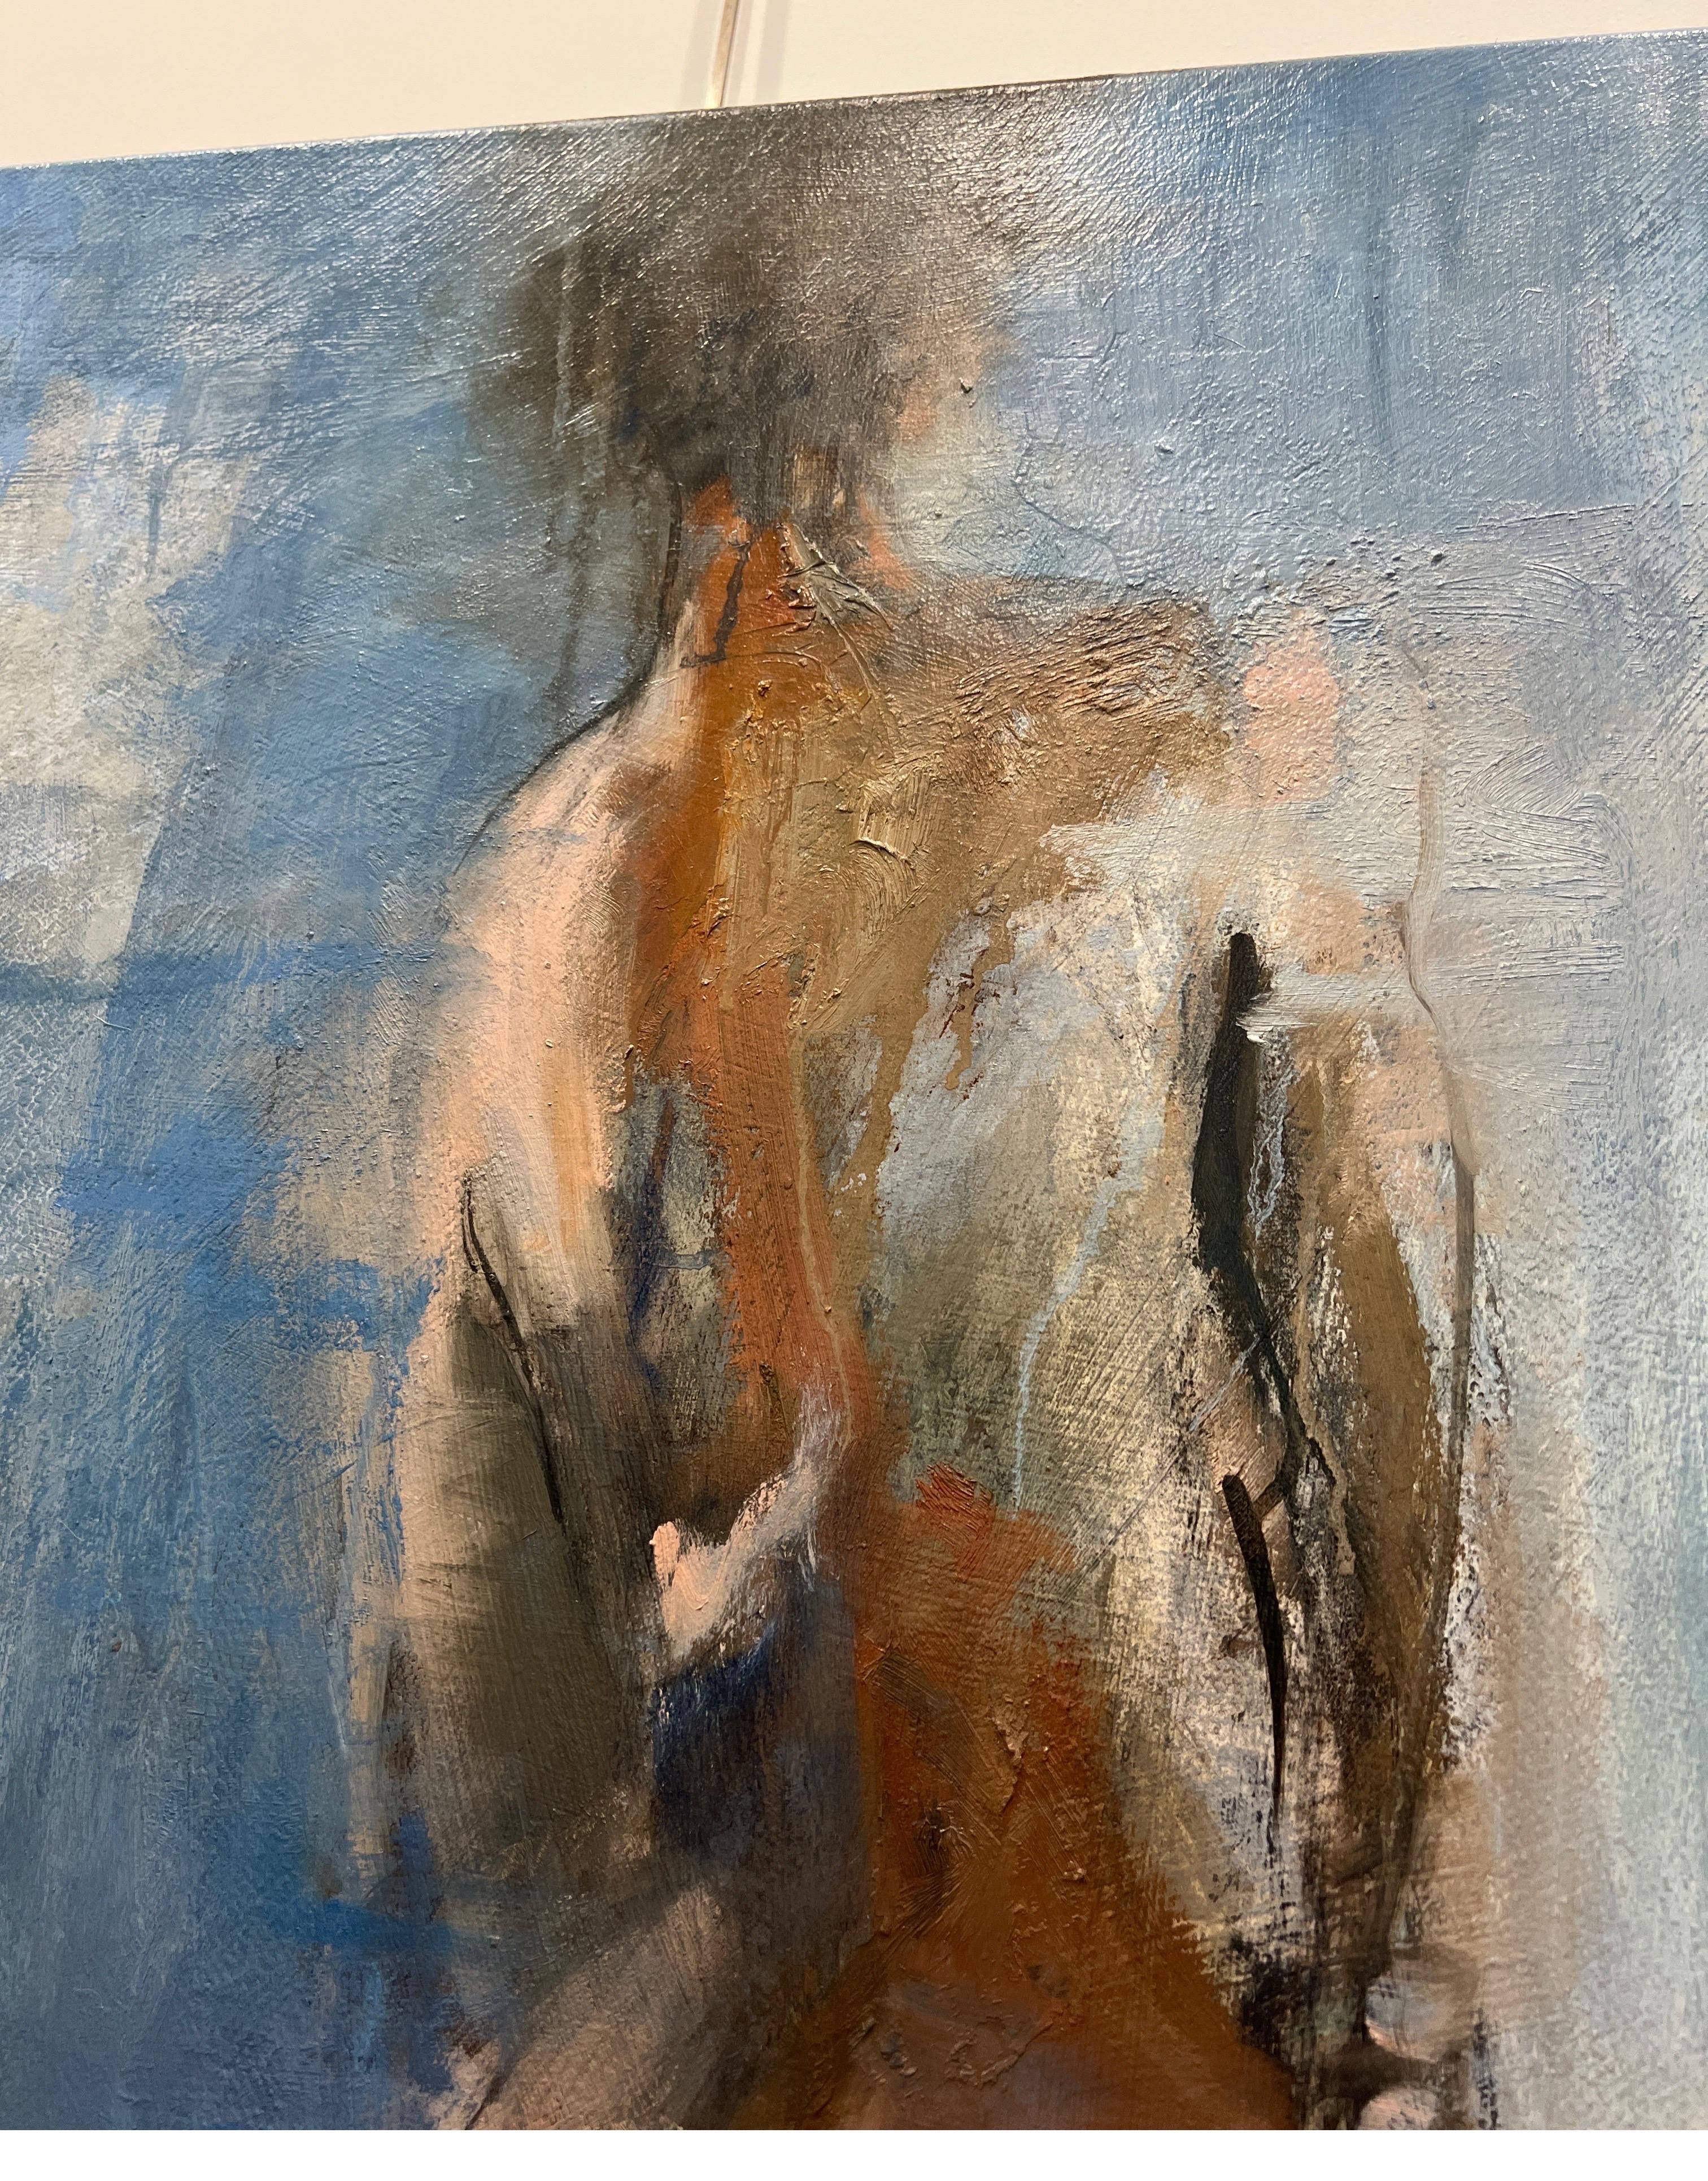 Look Out by Sharon Hockfield, Contemporary Nude Painting Oil on Canvas 2